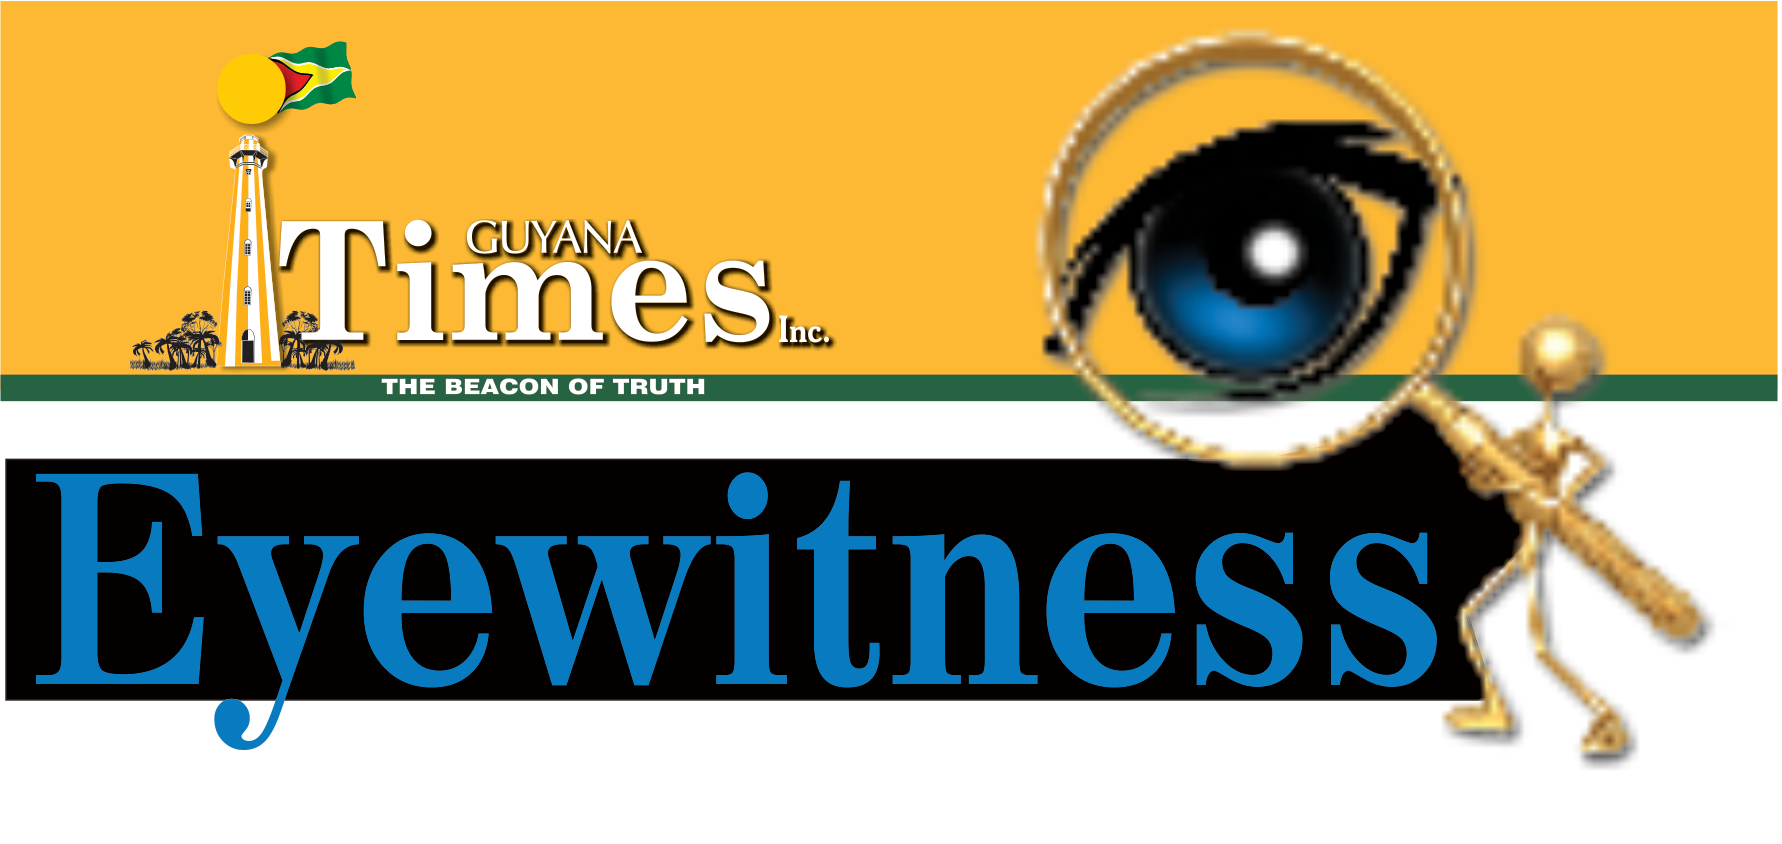 Justice … – Guyana Times